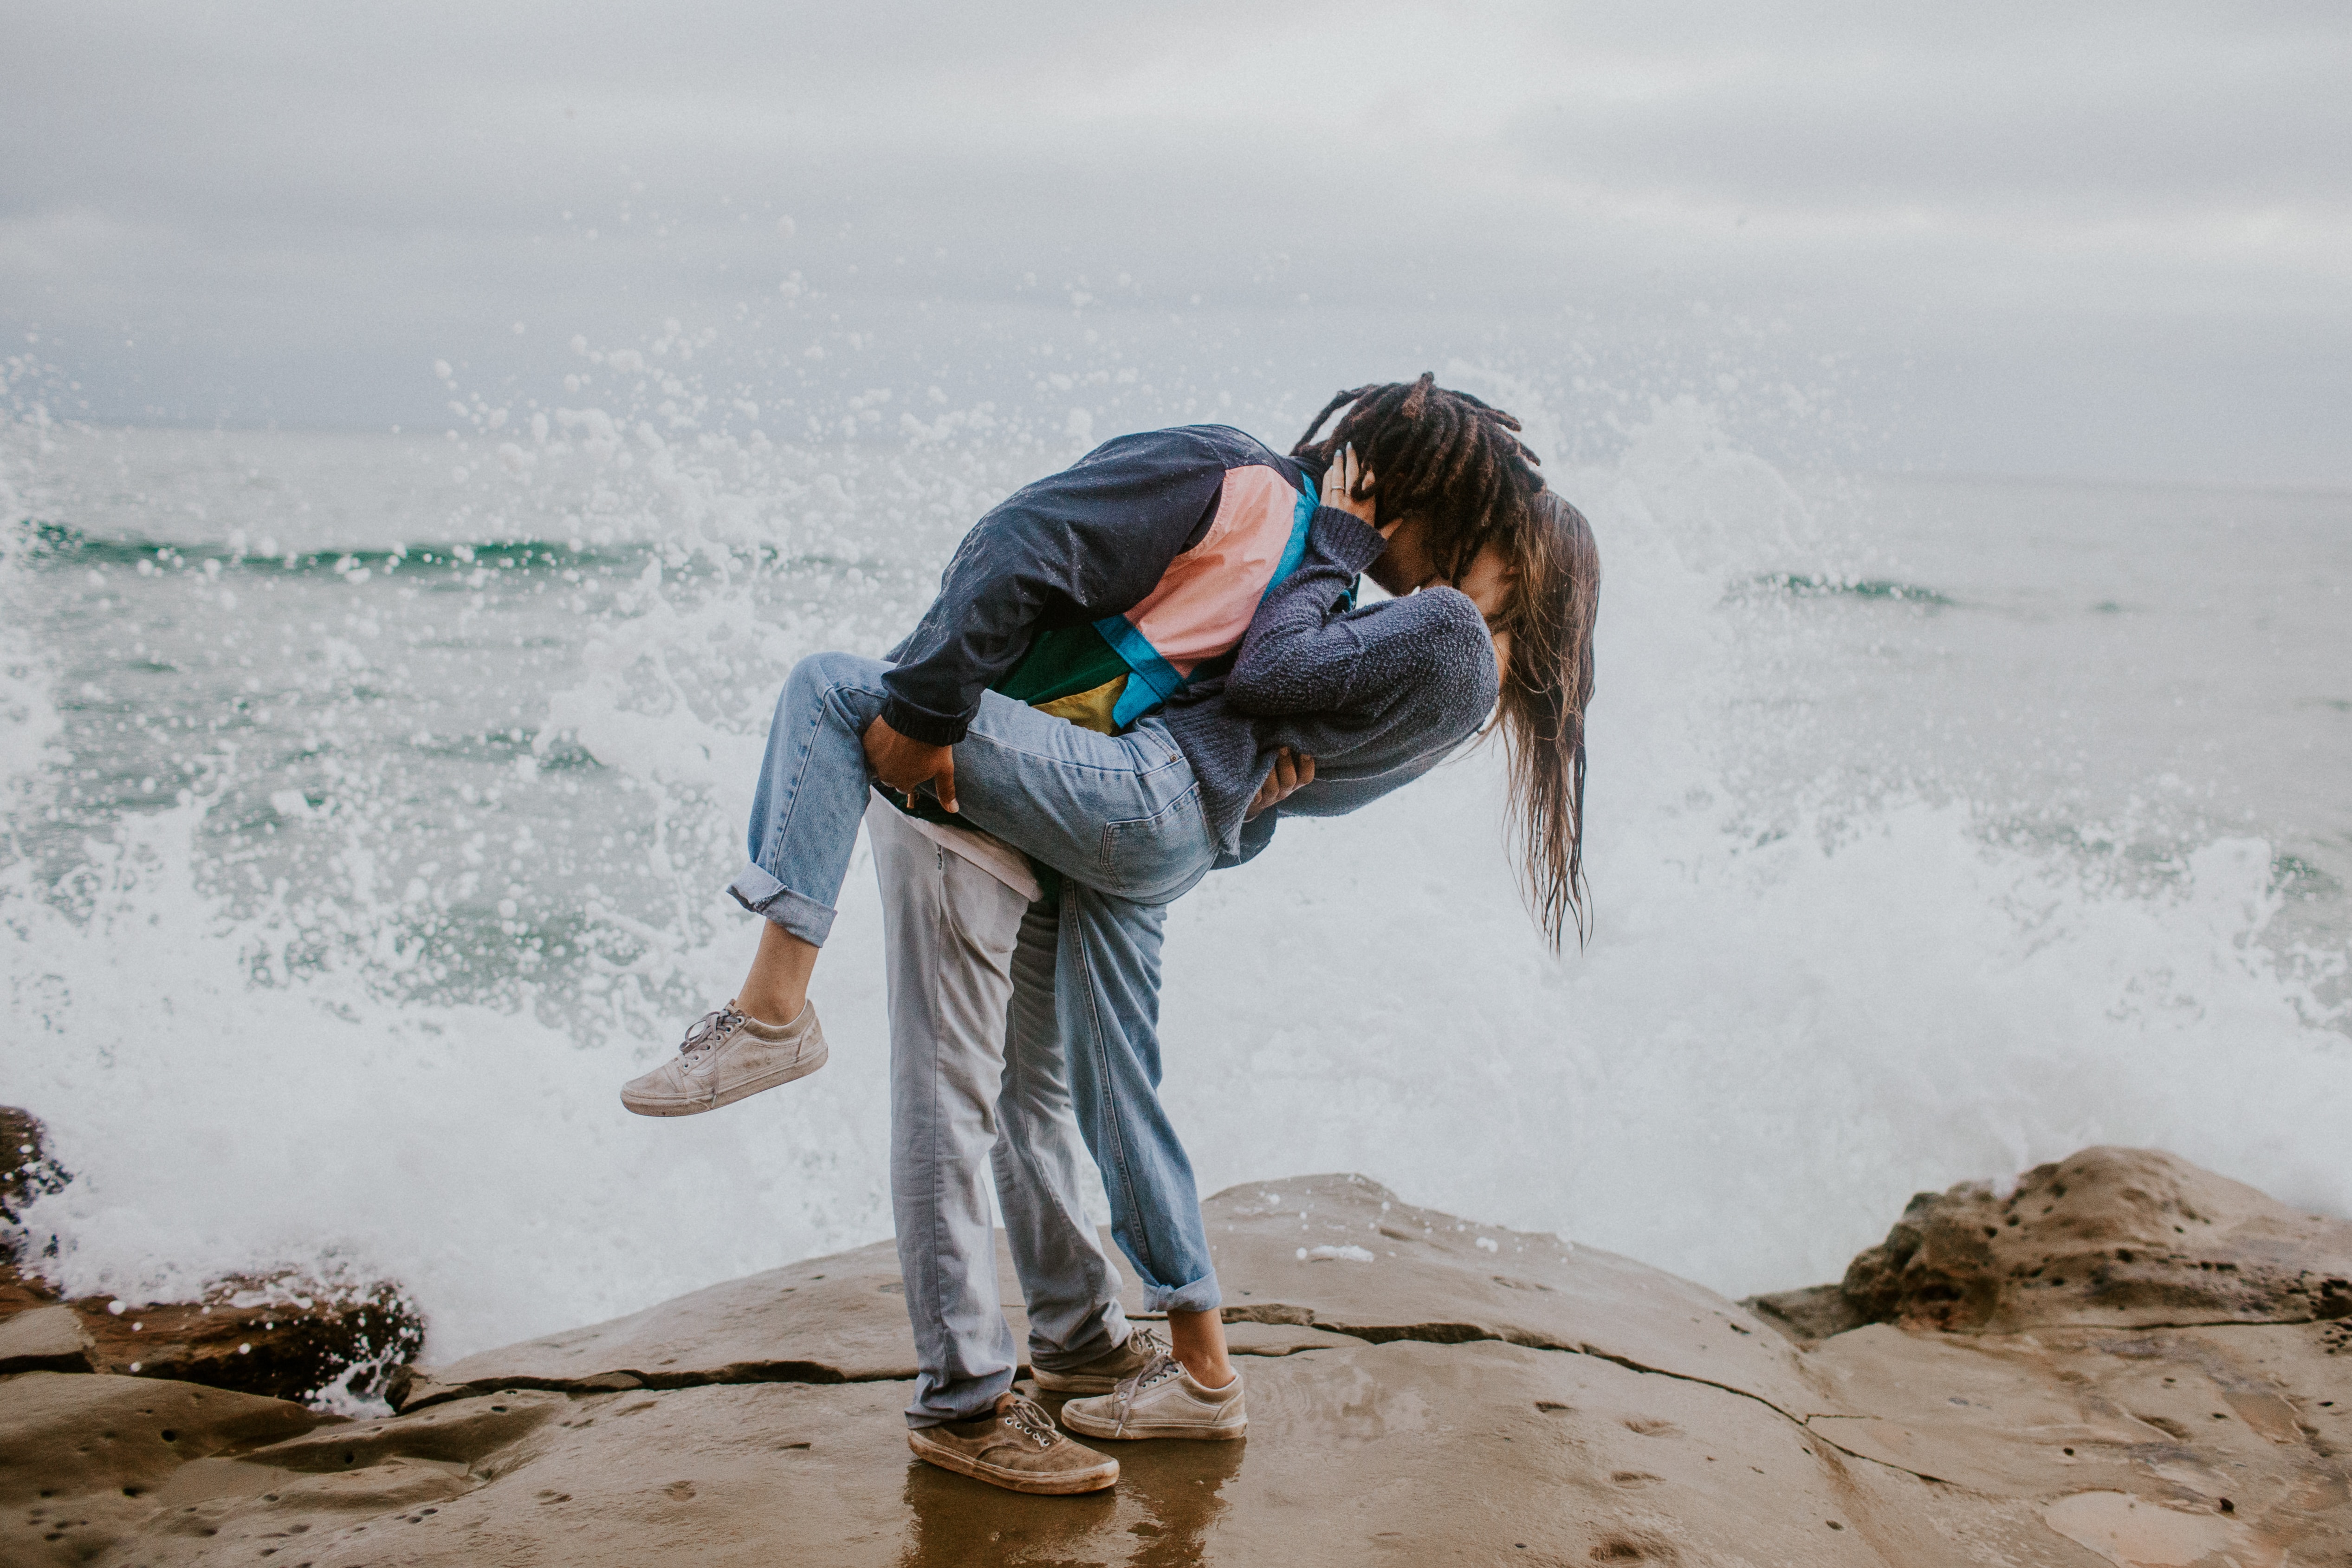 A couple kissing in front of the ocean. | Source: Unsplash